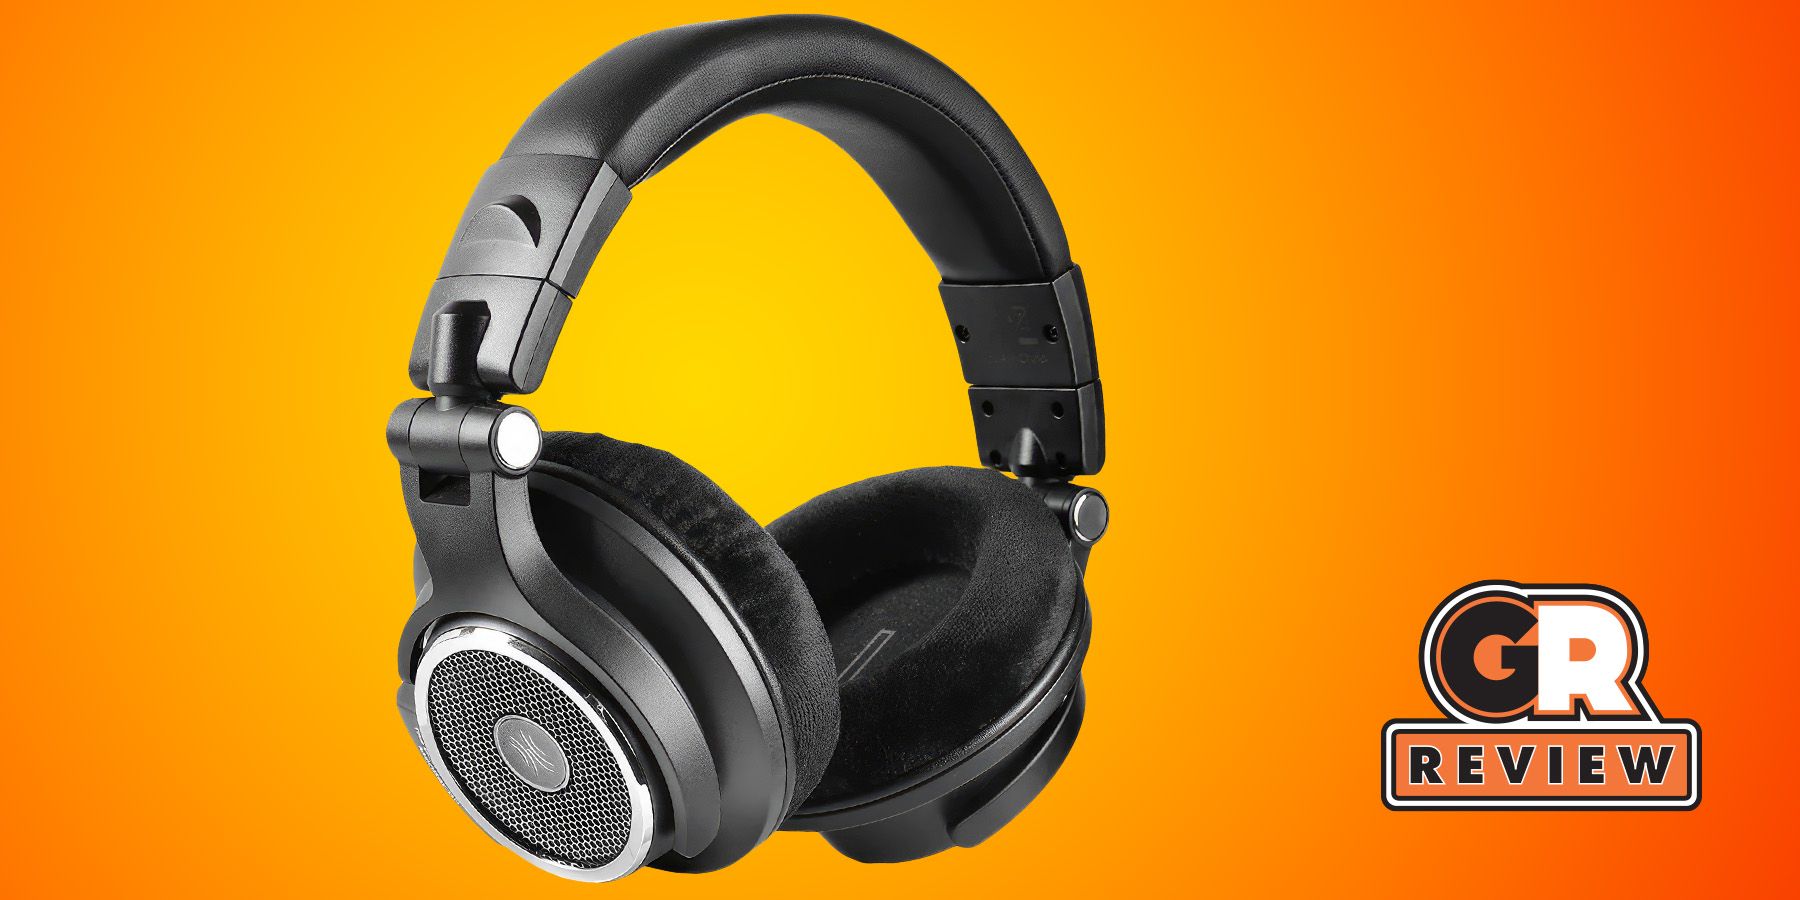 OneOdio Monitor 80 review: Excellent yet cheap wired headphones